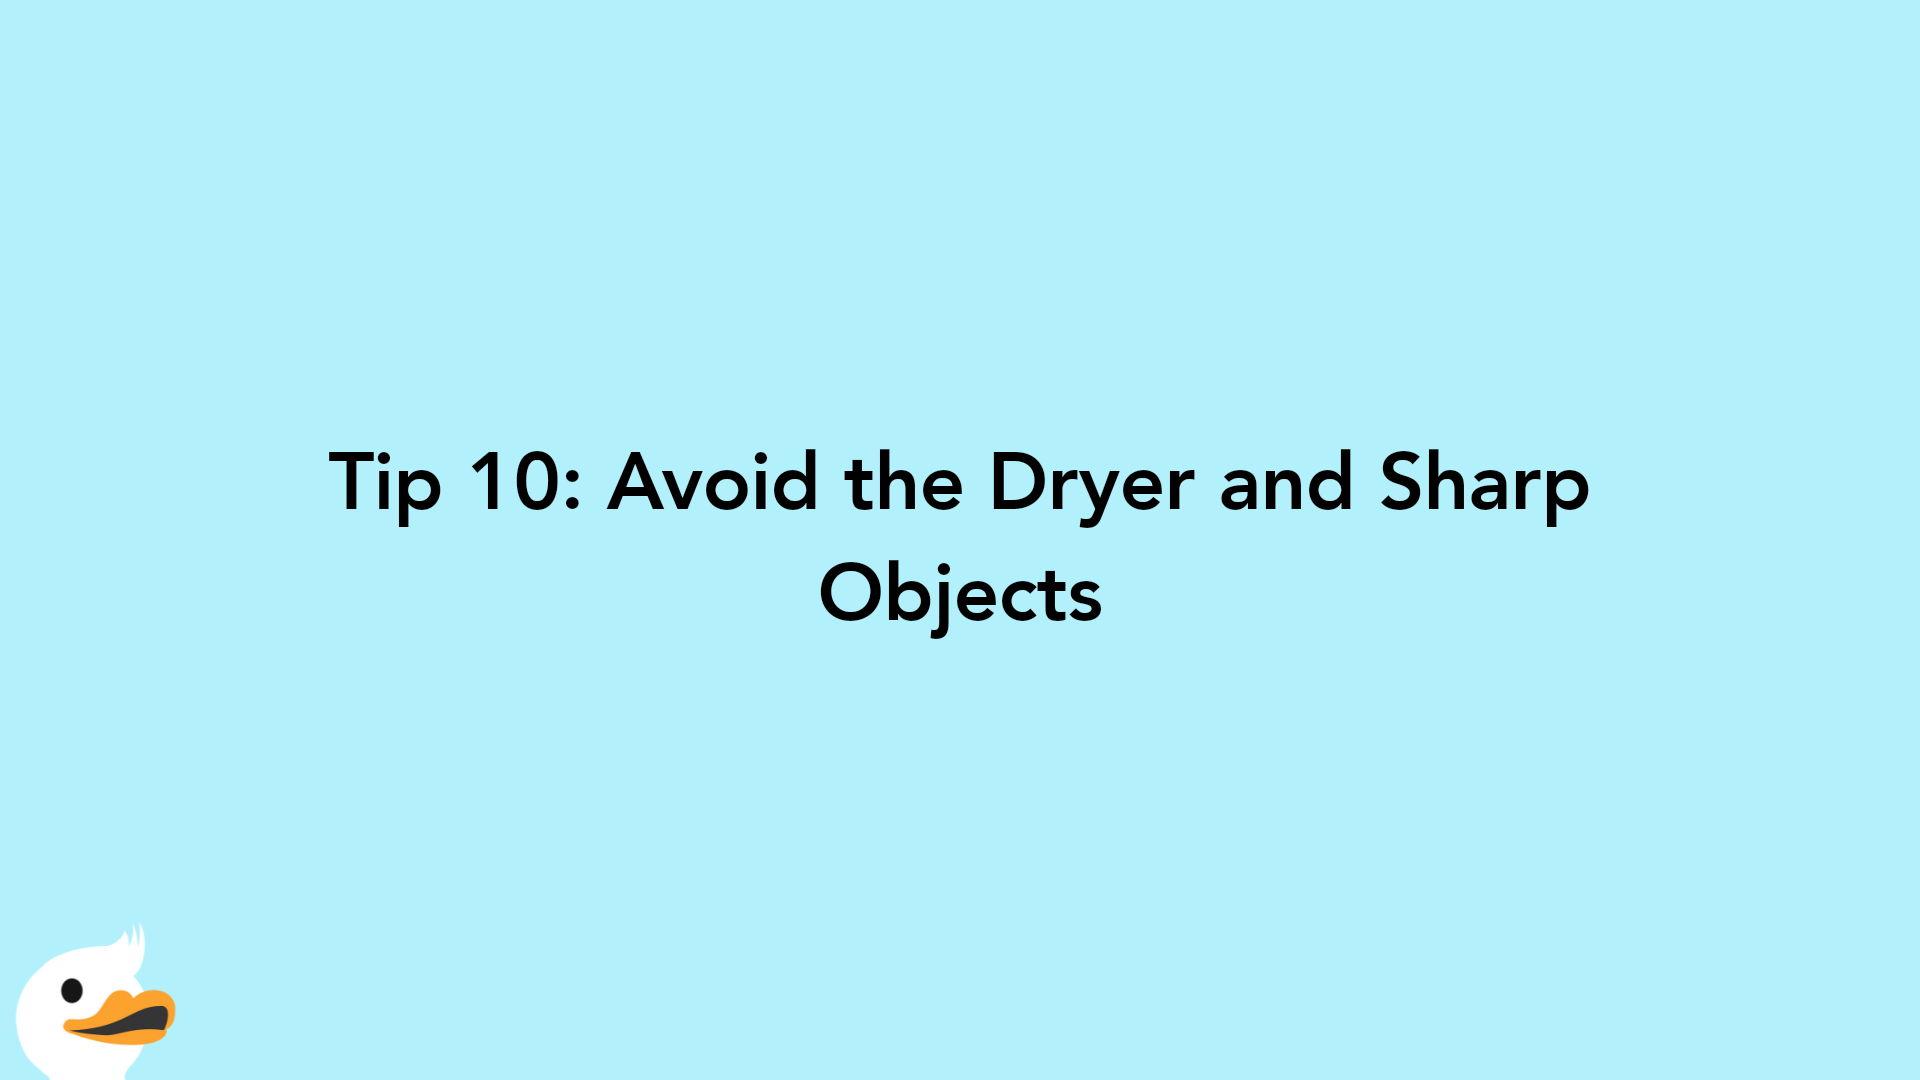 Tip 10: Avoid the Dryer and Sharp Objects